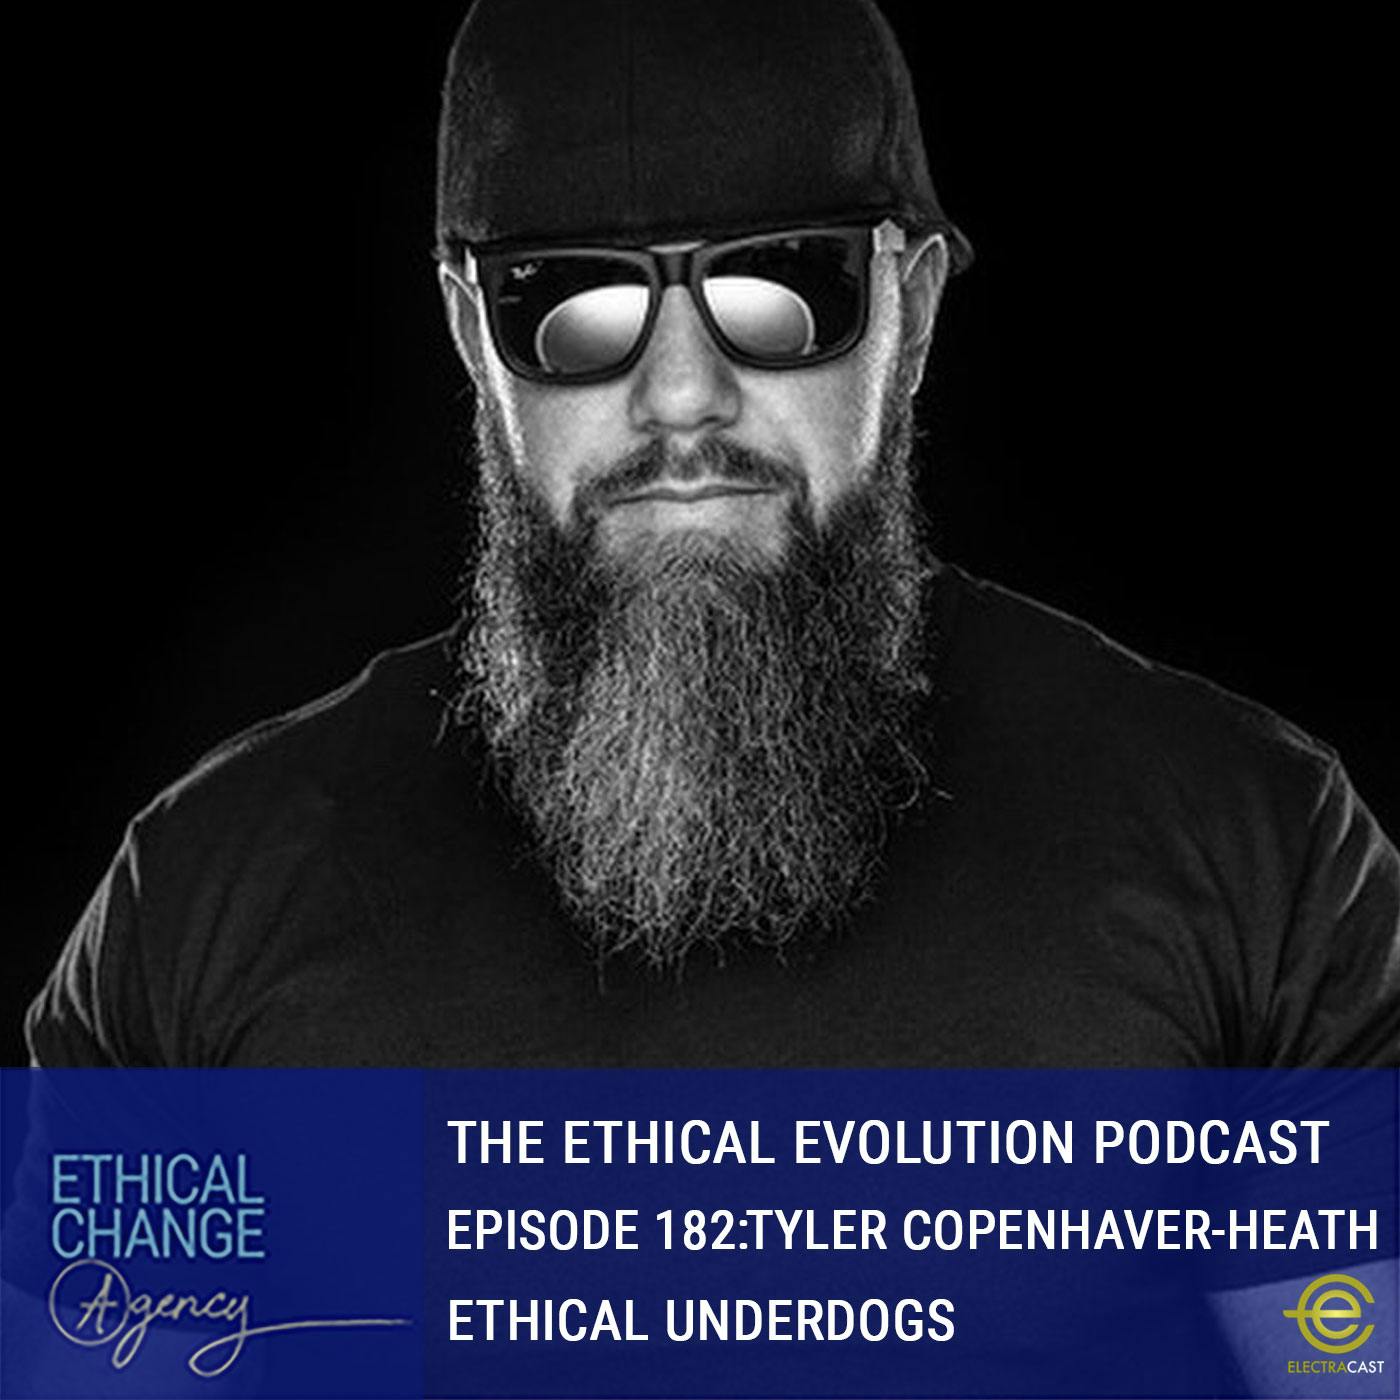 Ethical Underdogs with Tyler Copenhaver-Heath